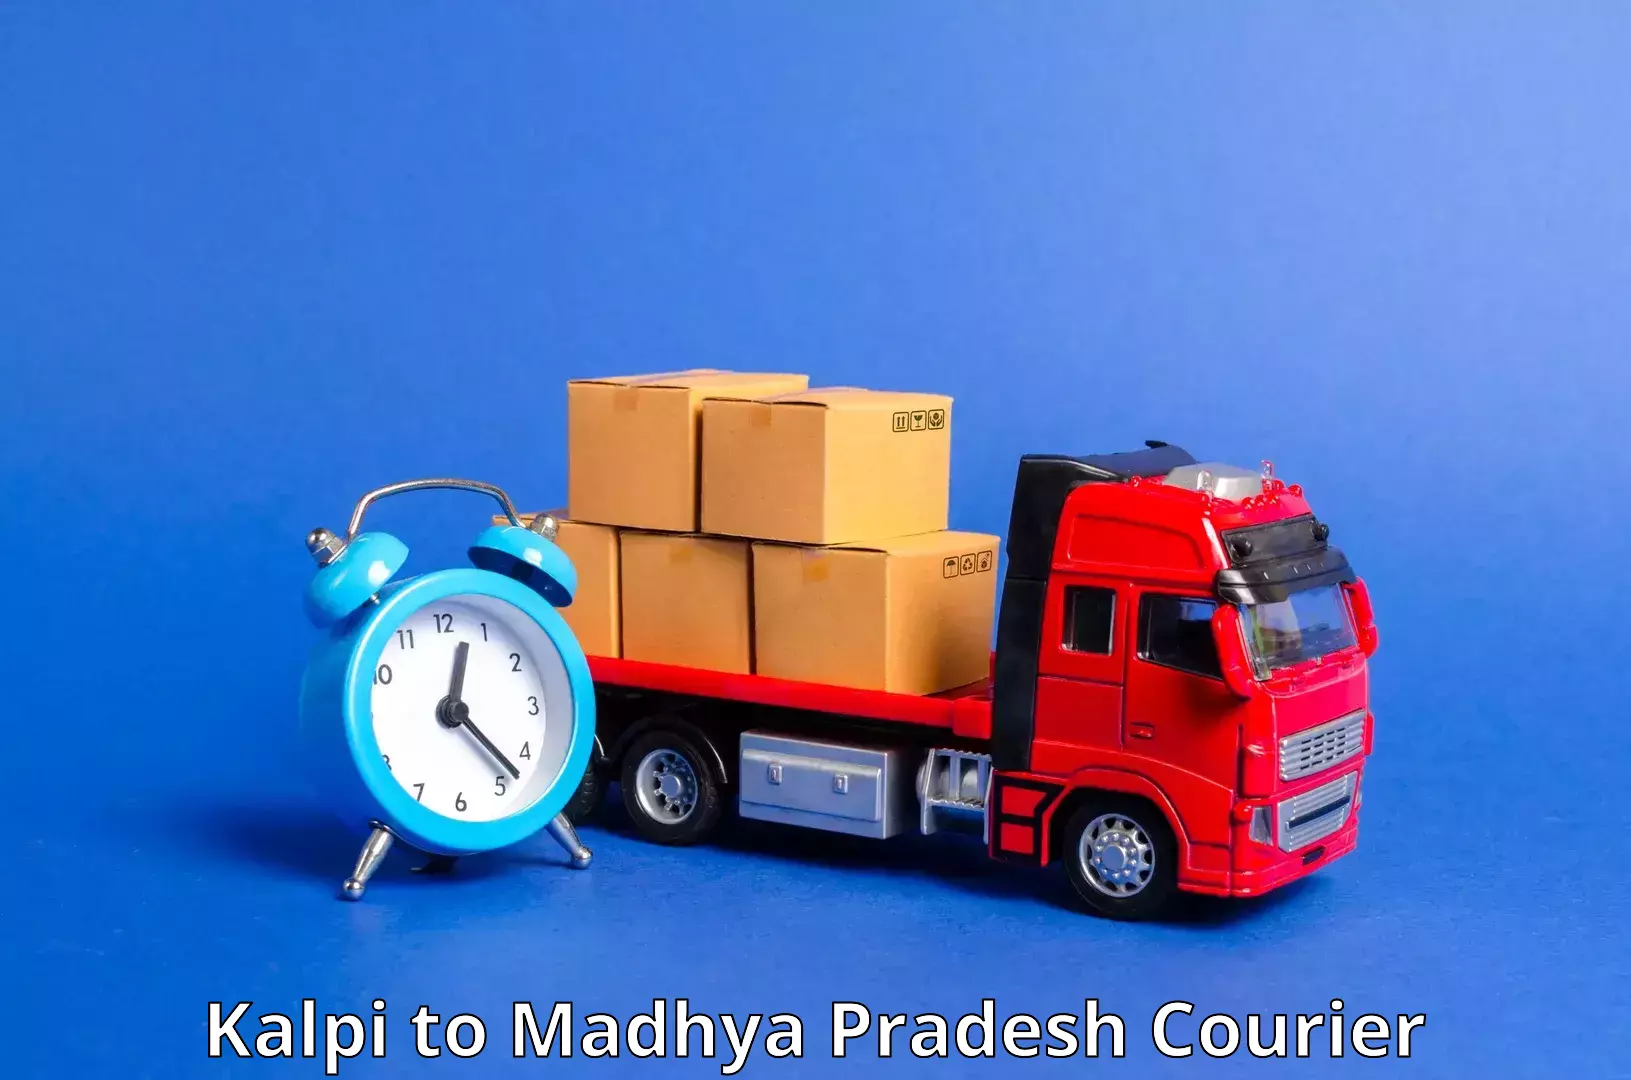 State-of-the-art courier technology Kalpi to Sagar